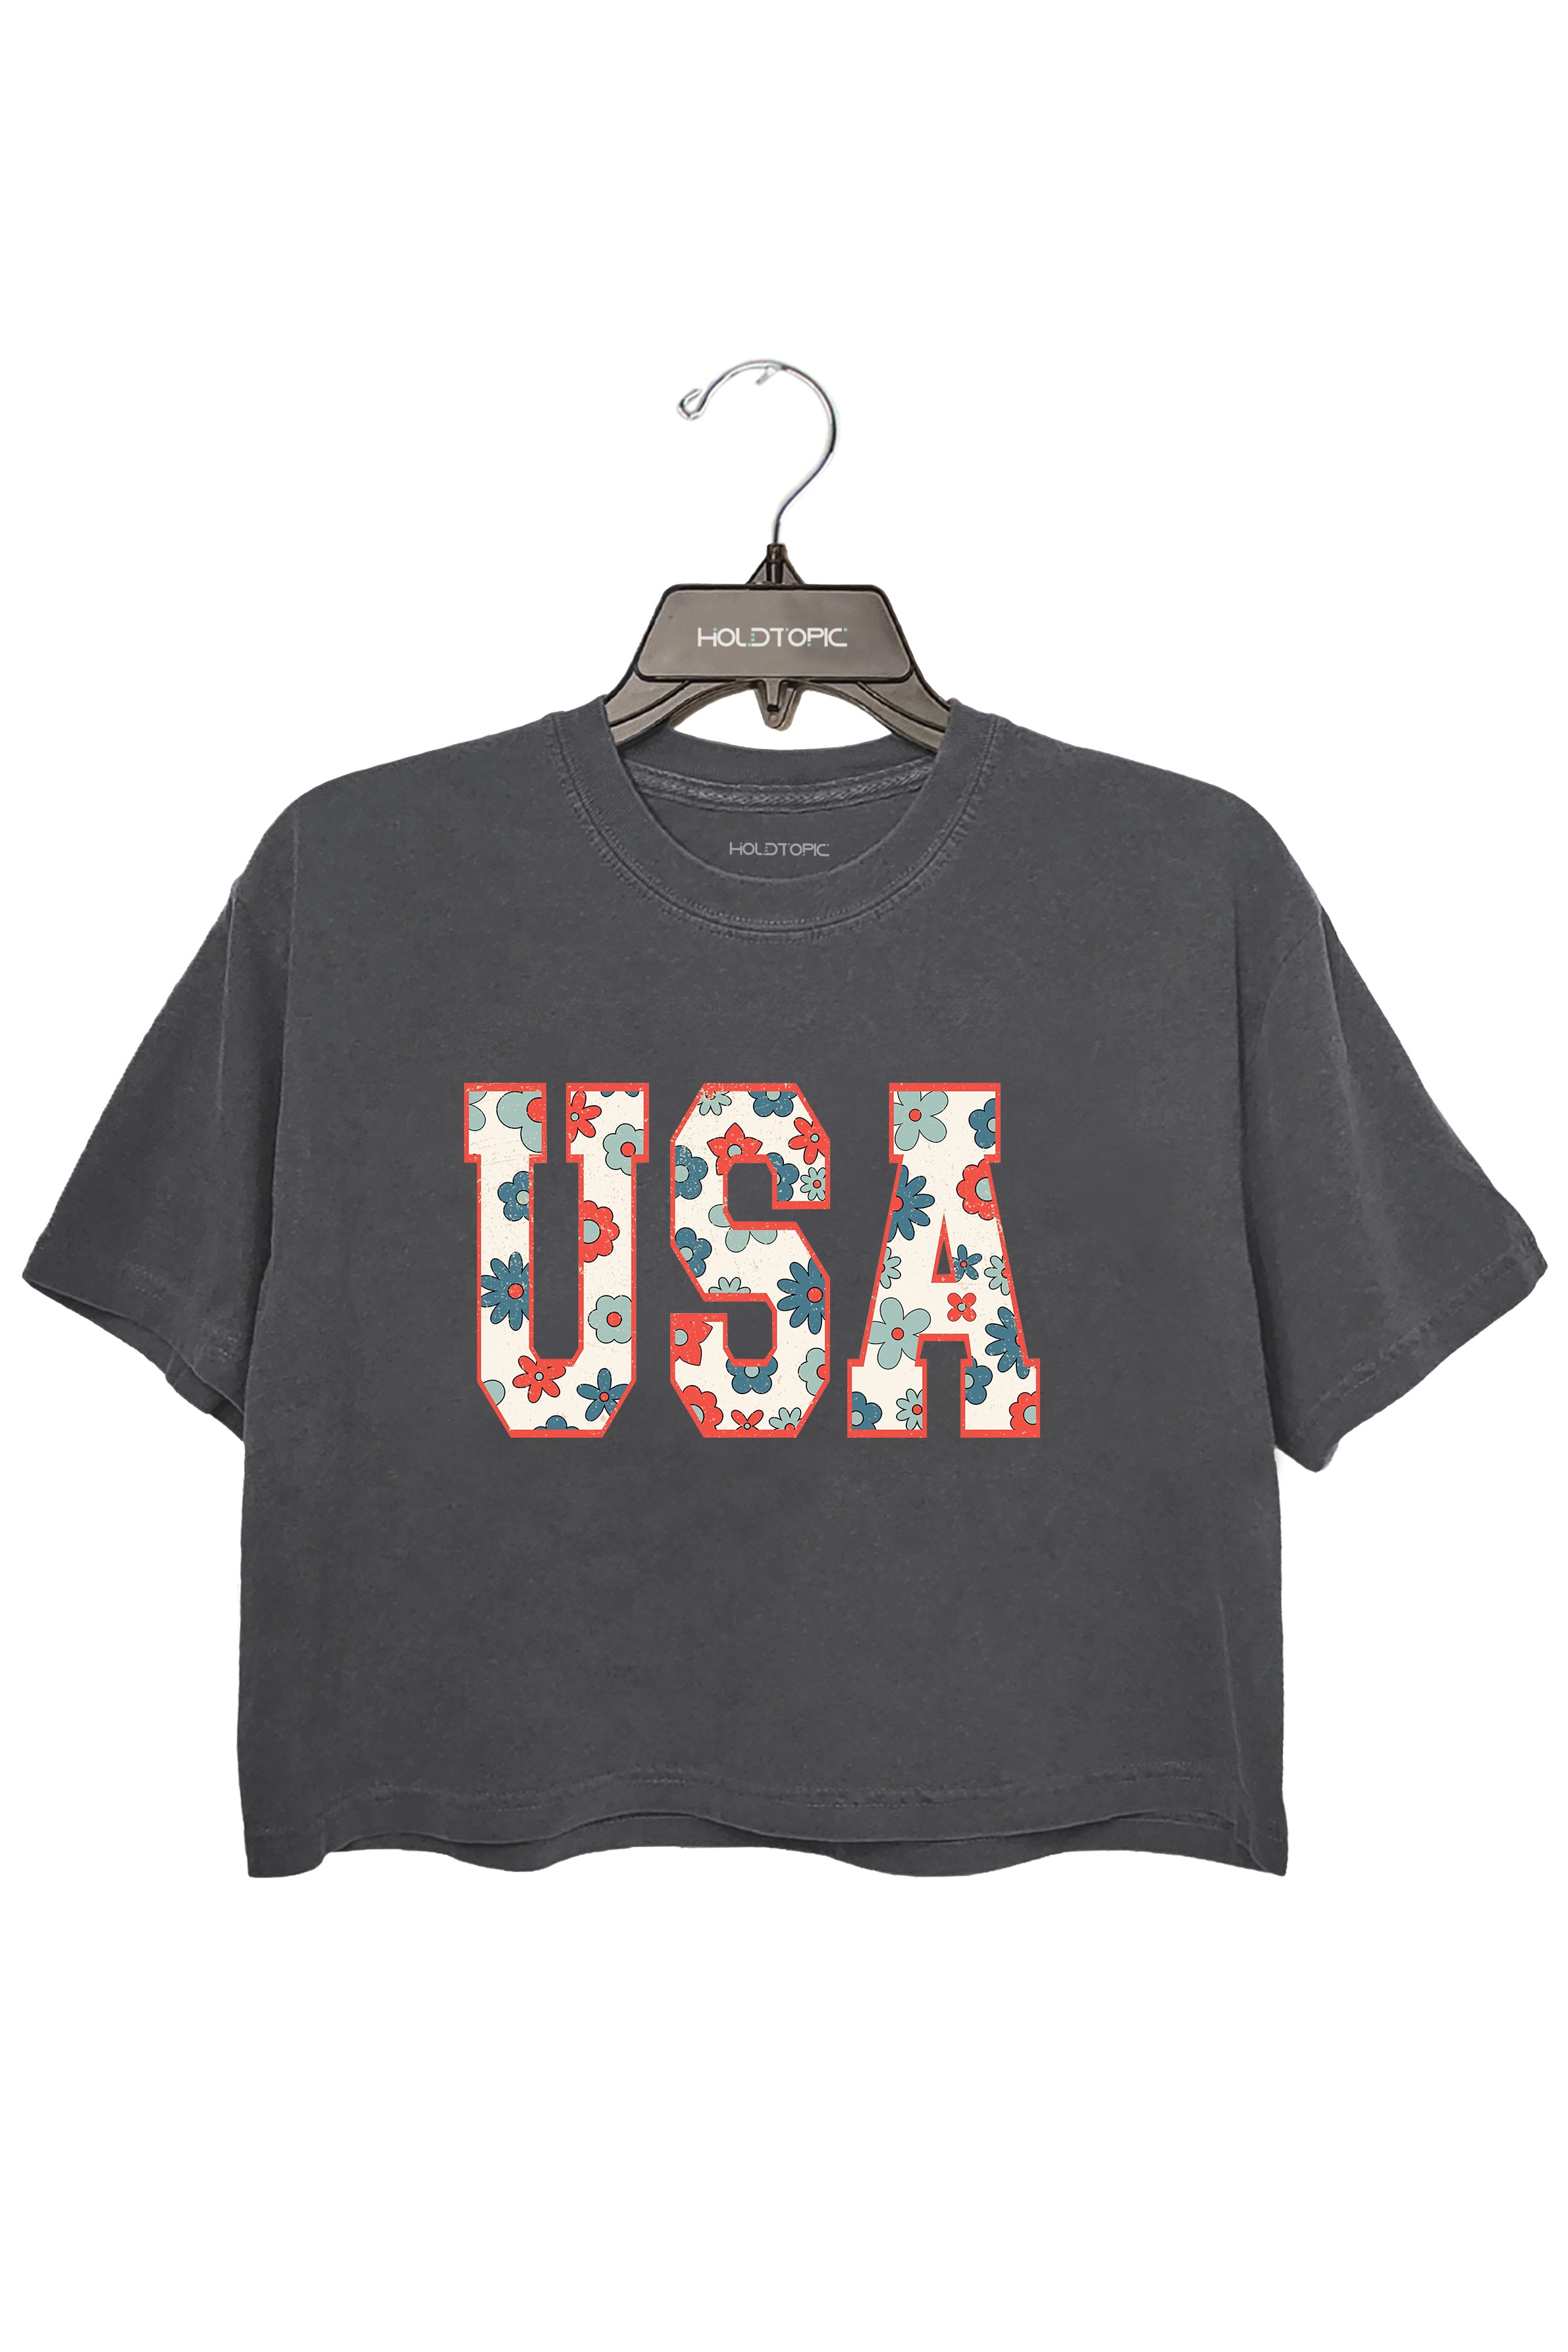 USA Crop Top For Women holdtopic